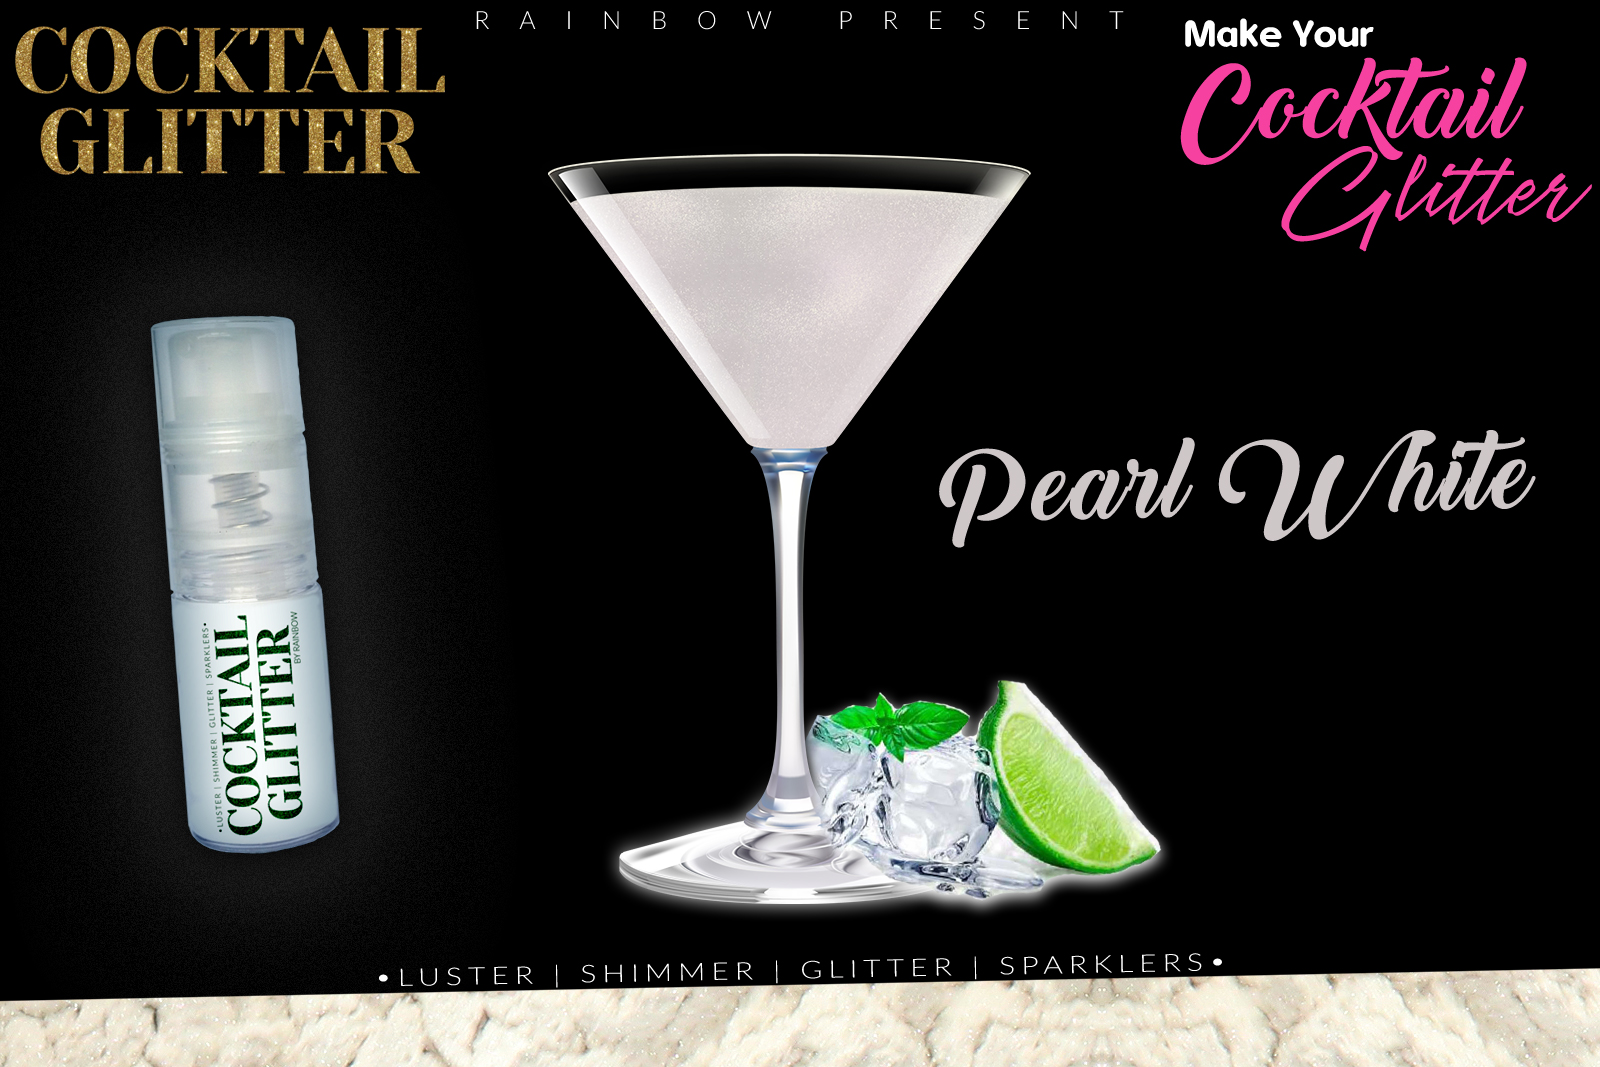 Glitzy Cocktail Glitter and Sparkling Effect | Edible | Pearl White